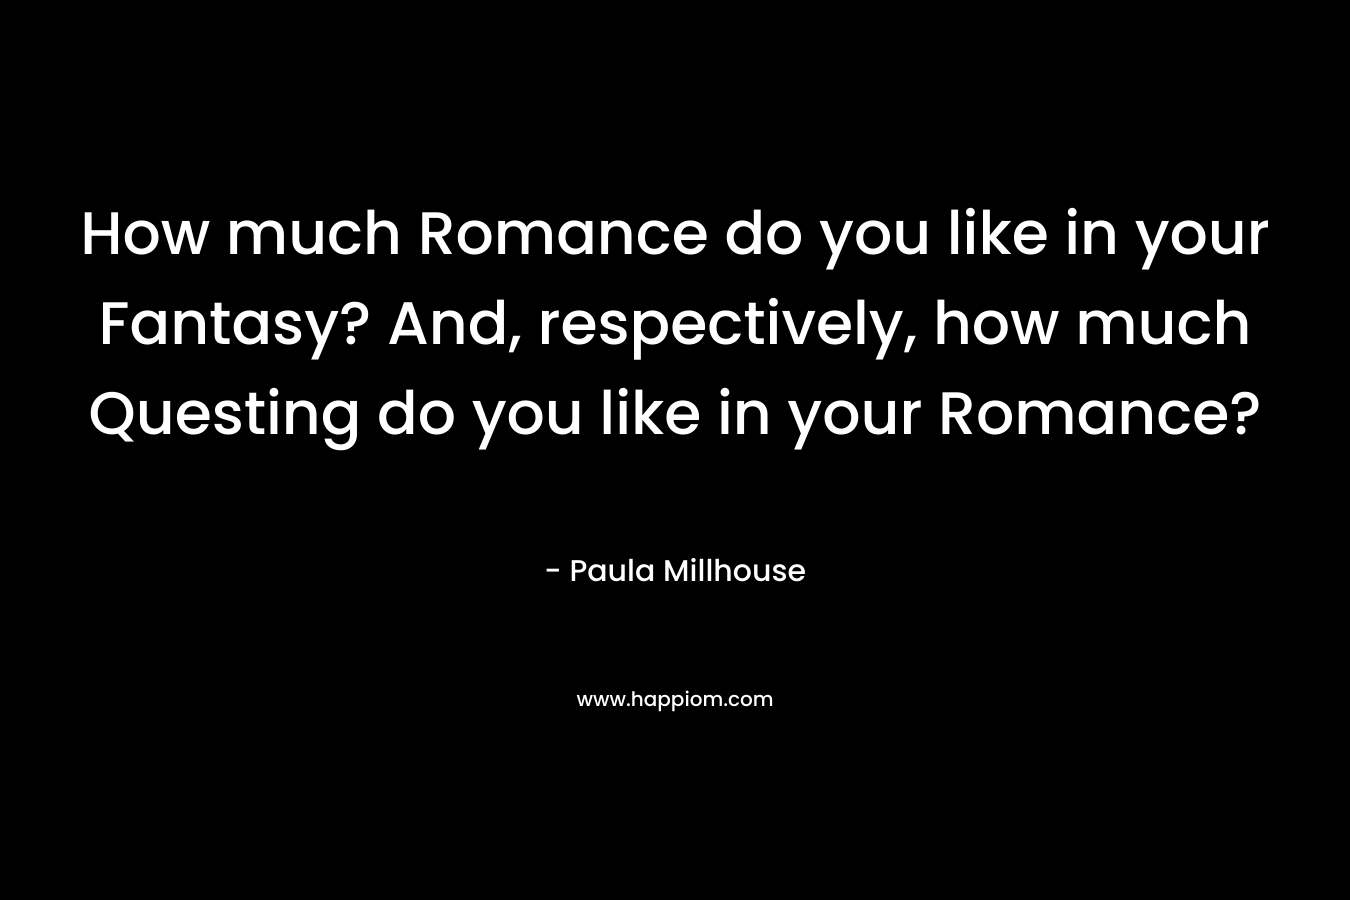 How much Romance do you like in your Fantasy? And, respectively, how much Questing do you like in your Romance?